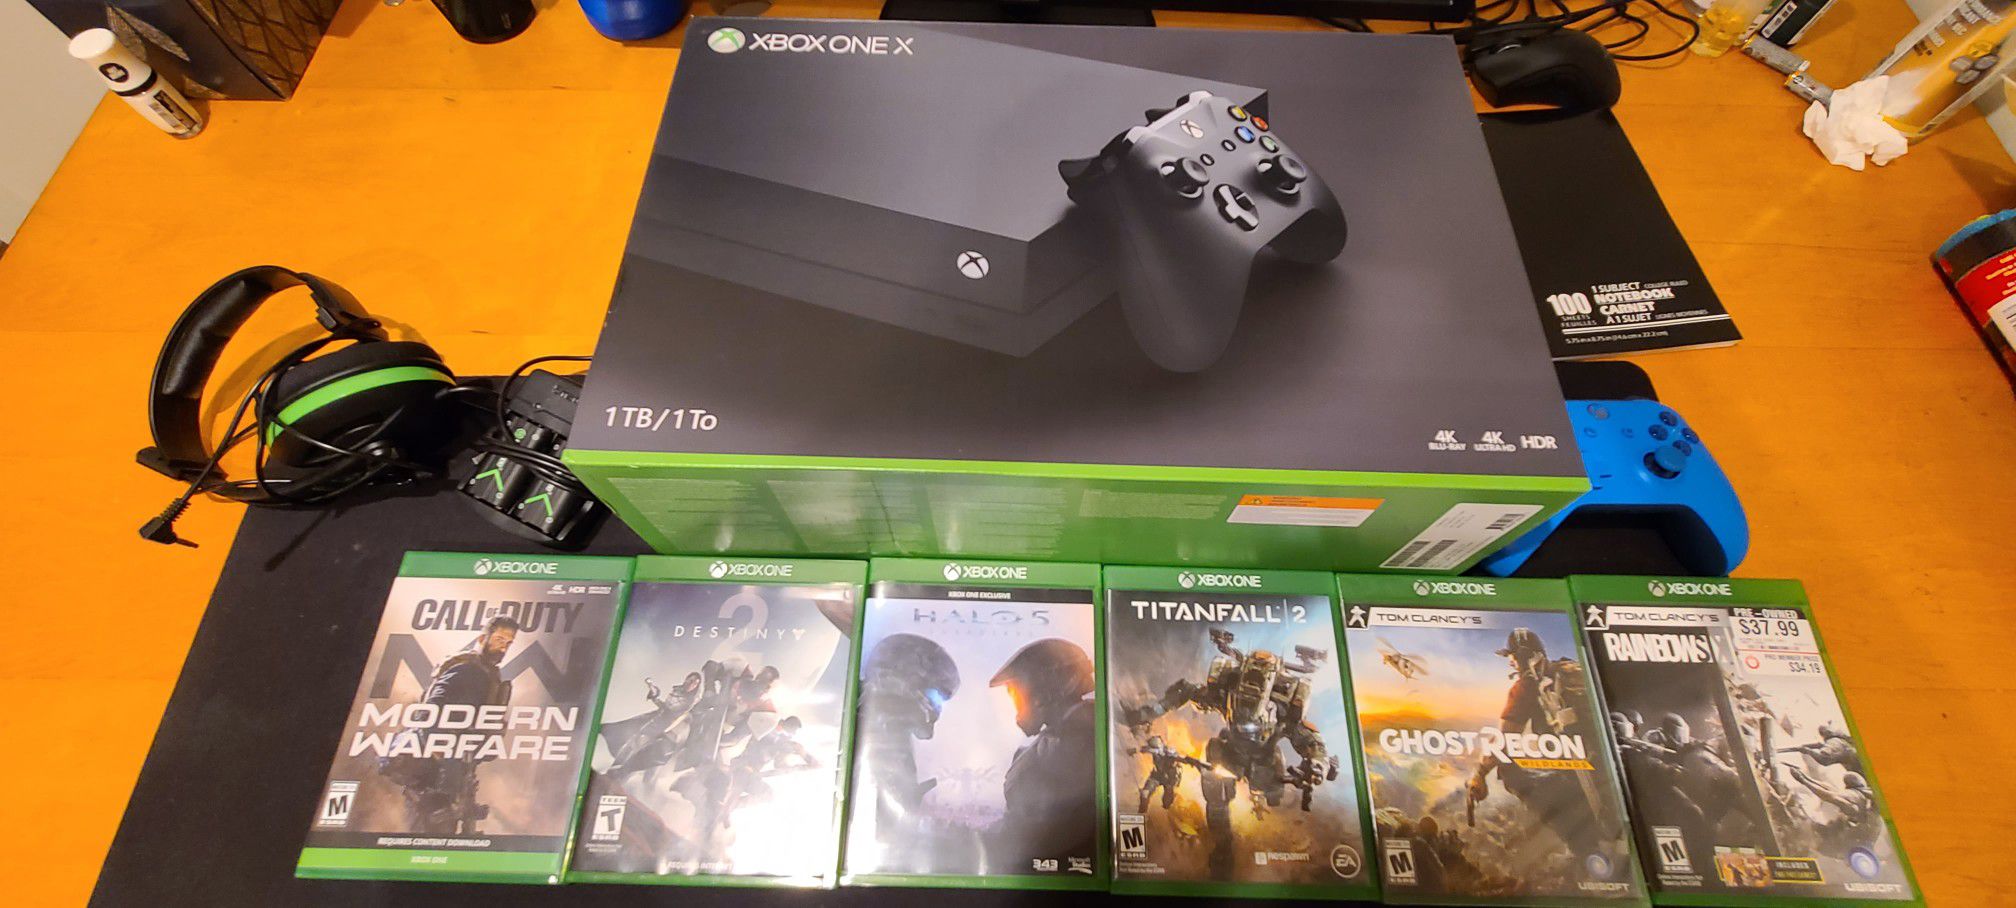 Xbox one X + 5 games/accessories